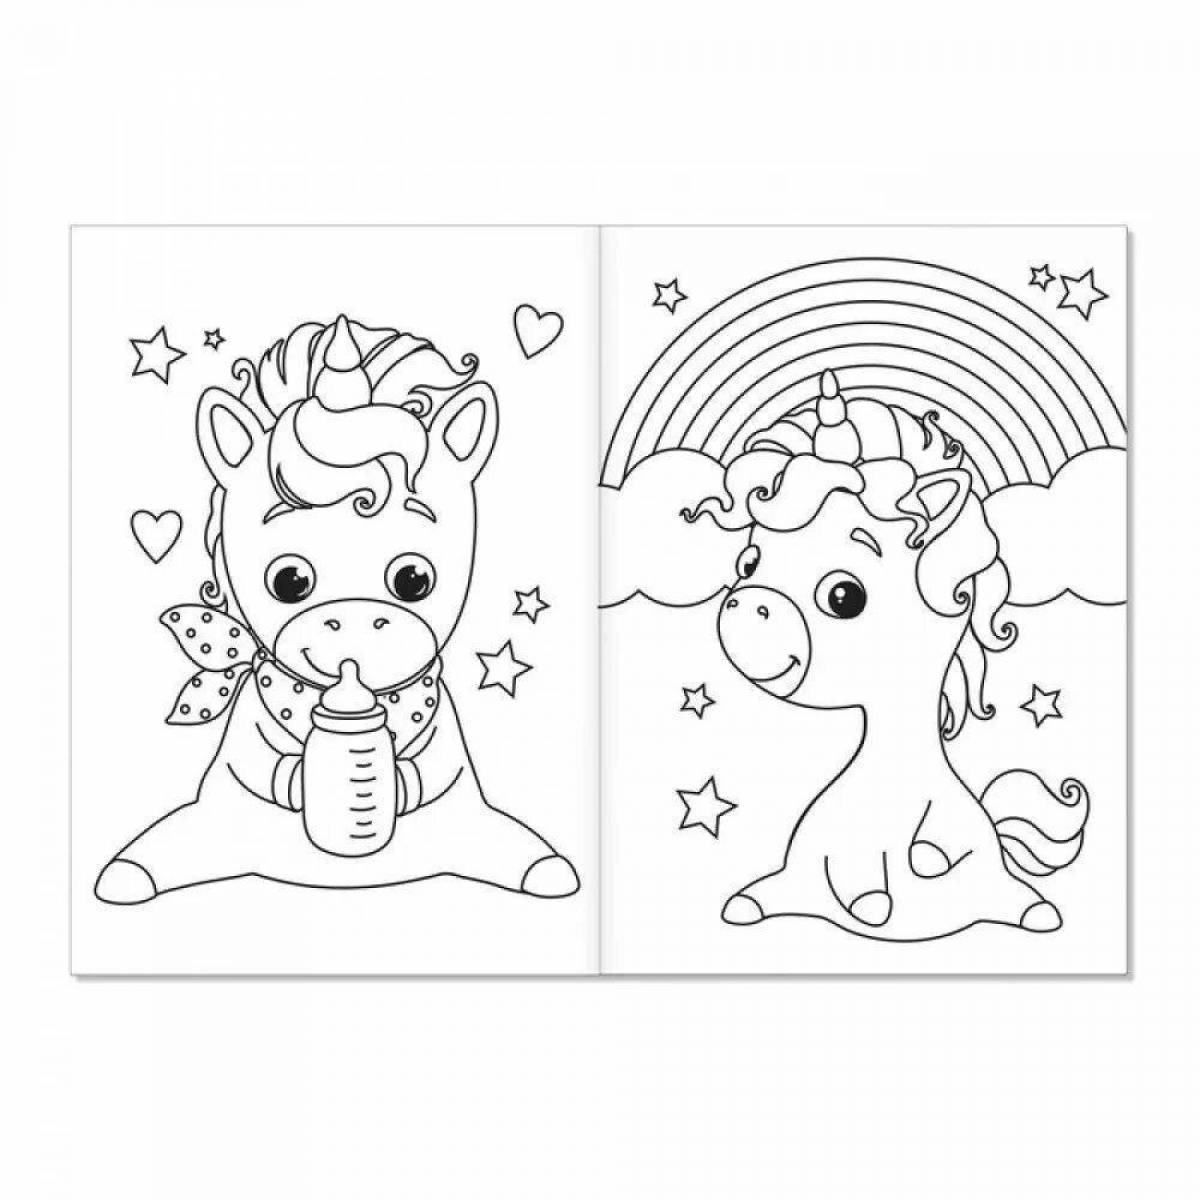 Crazy coloring page 2 drawings